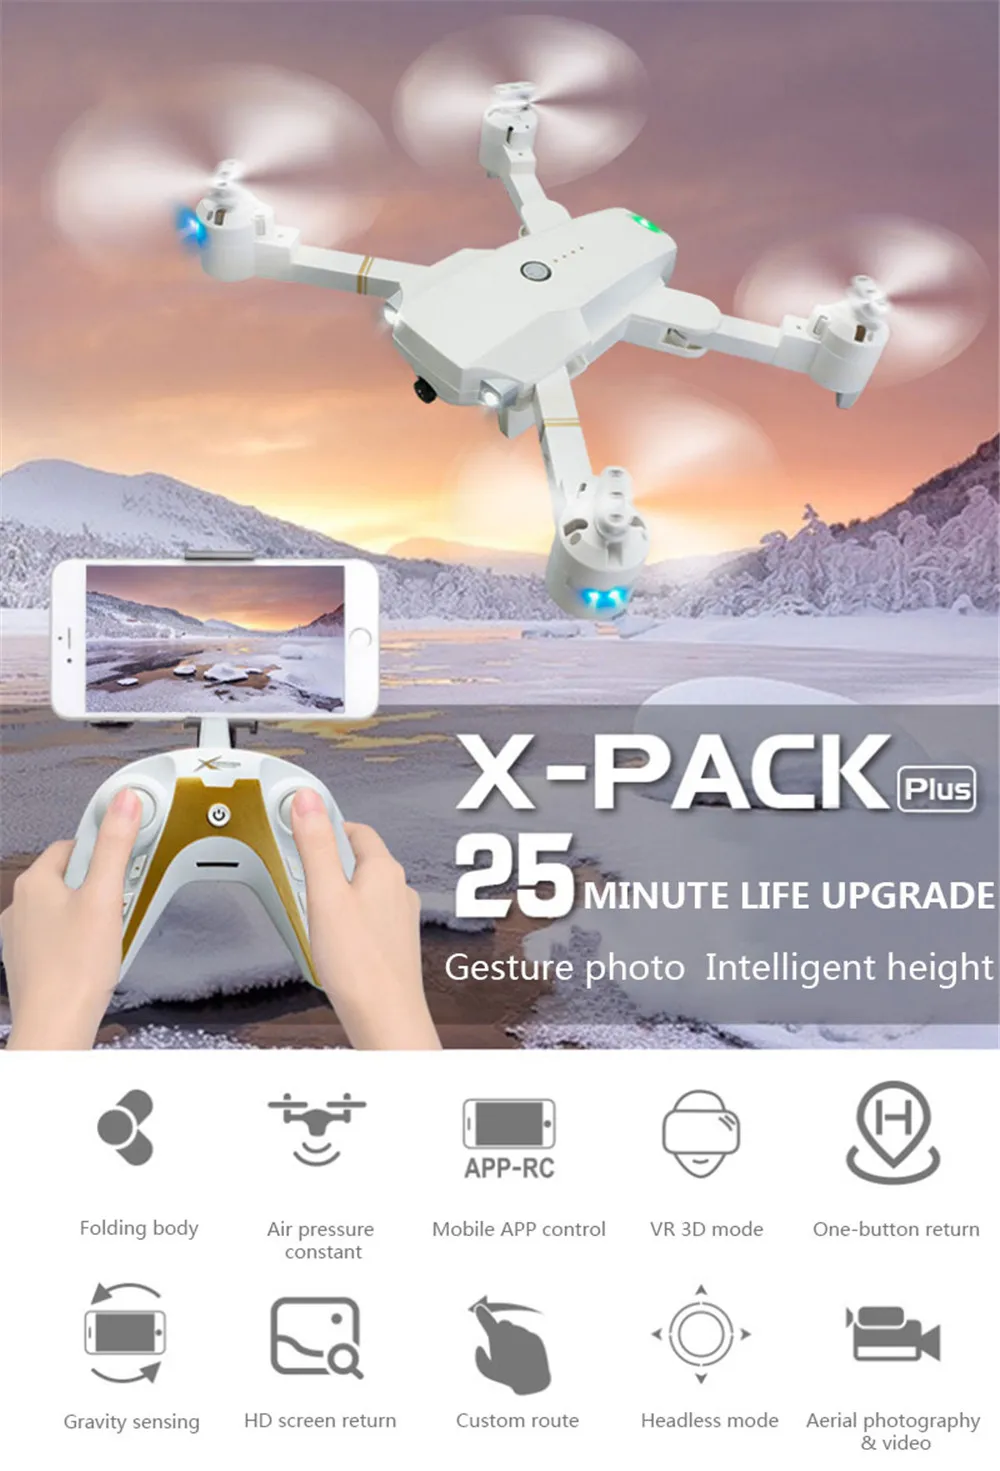 Drones Flight 25 Minu AR Game intelligent Follow ESC HD Wide-angle Camera Drone Gesture Shooting photo Video Voice Control Drone